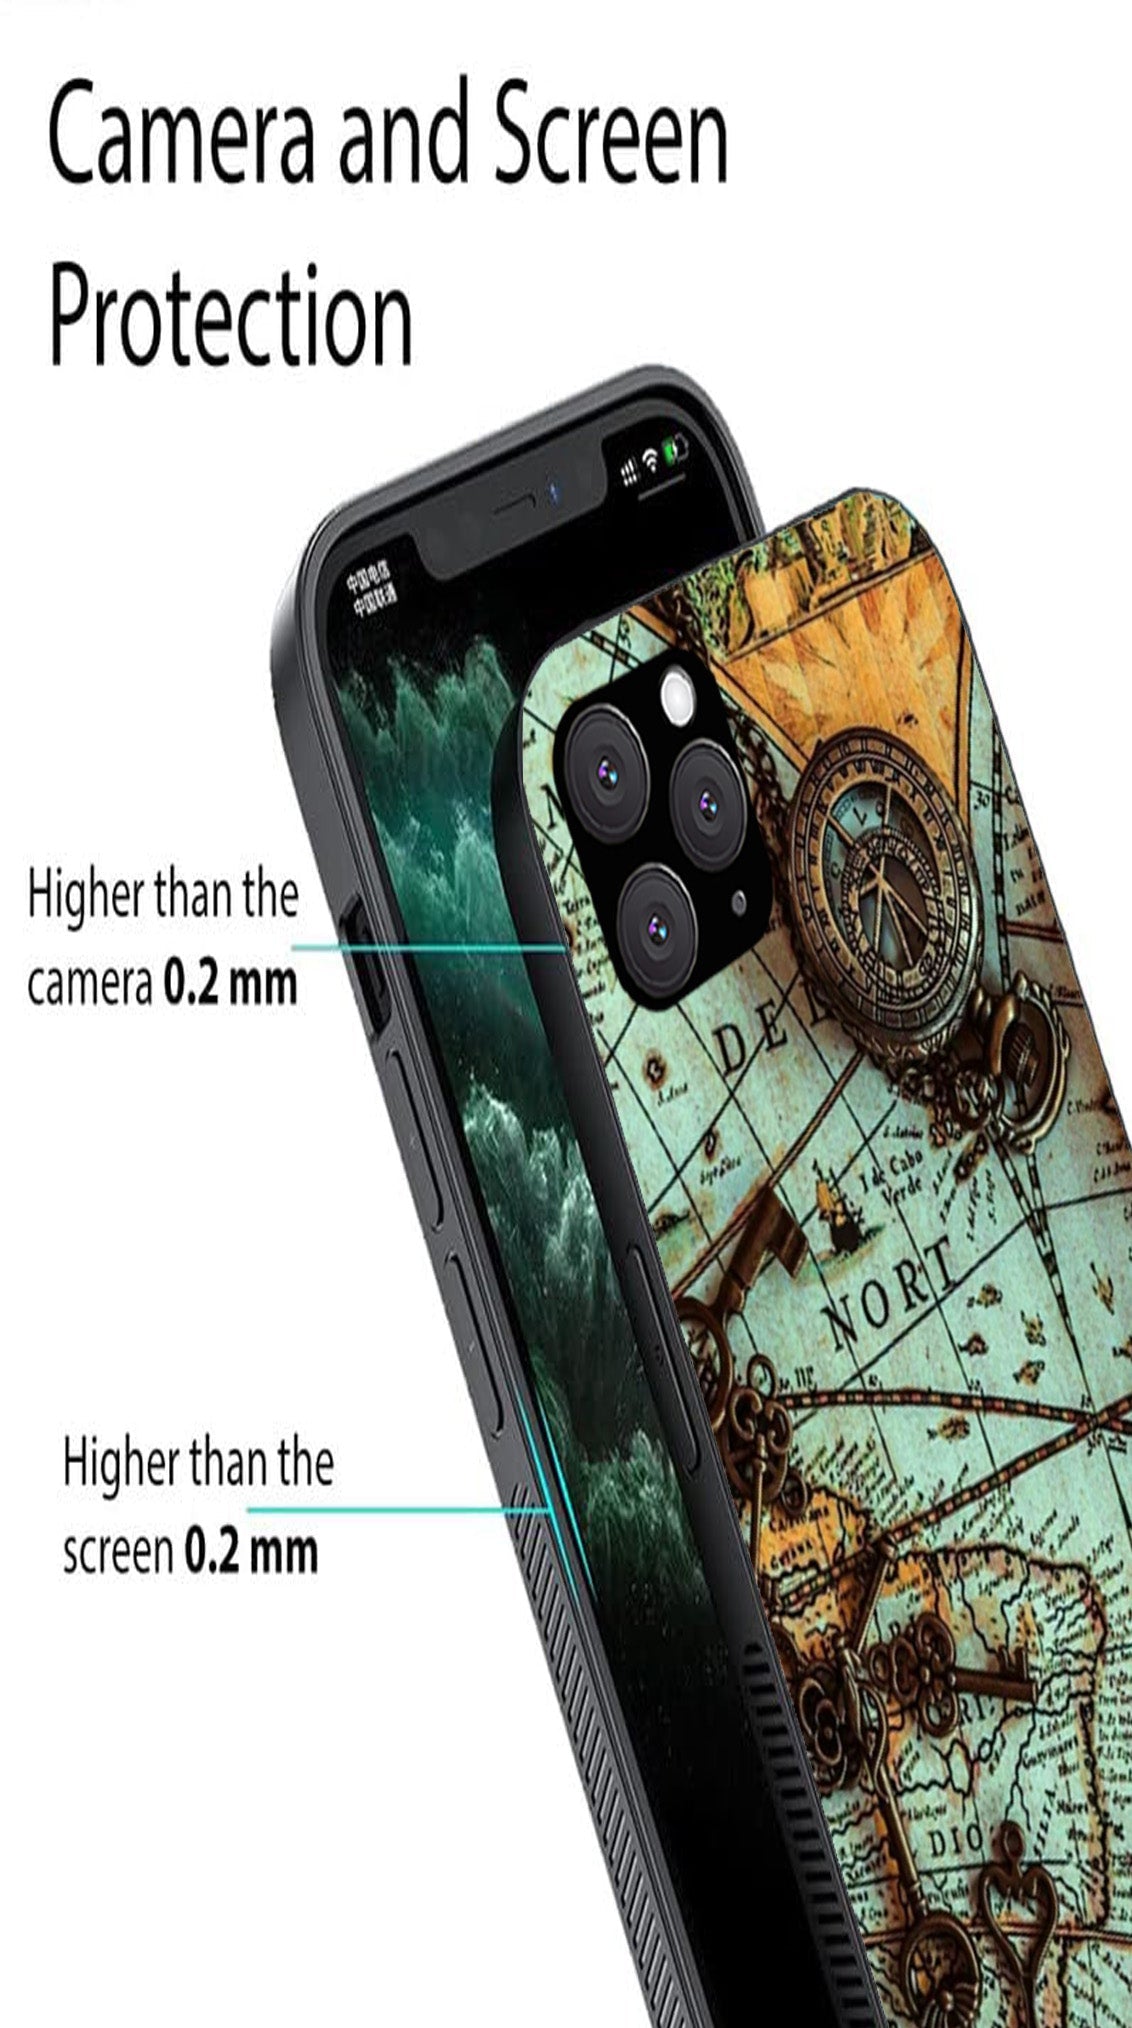 Map Design Metal Mobile Case for iPhone 11 Pro